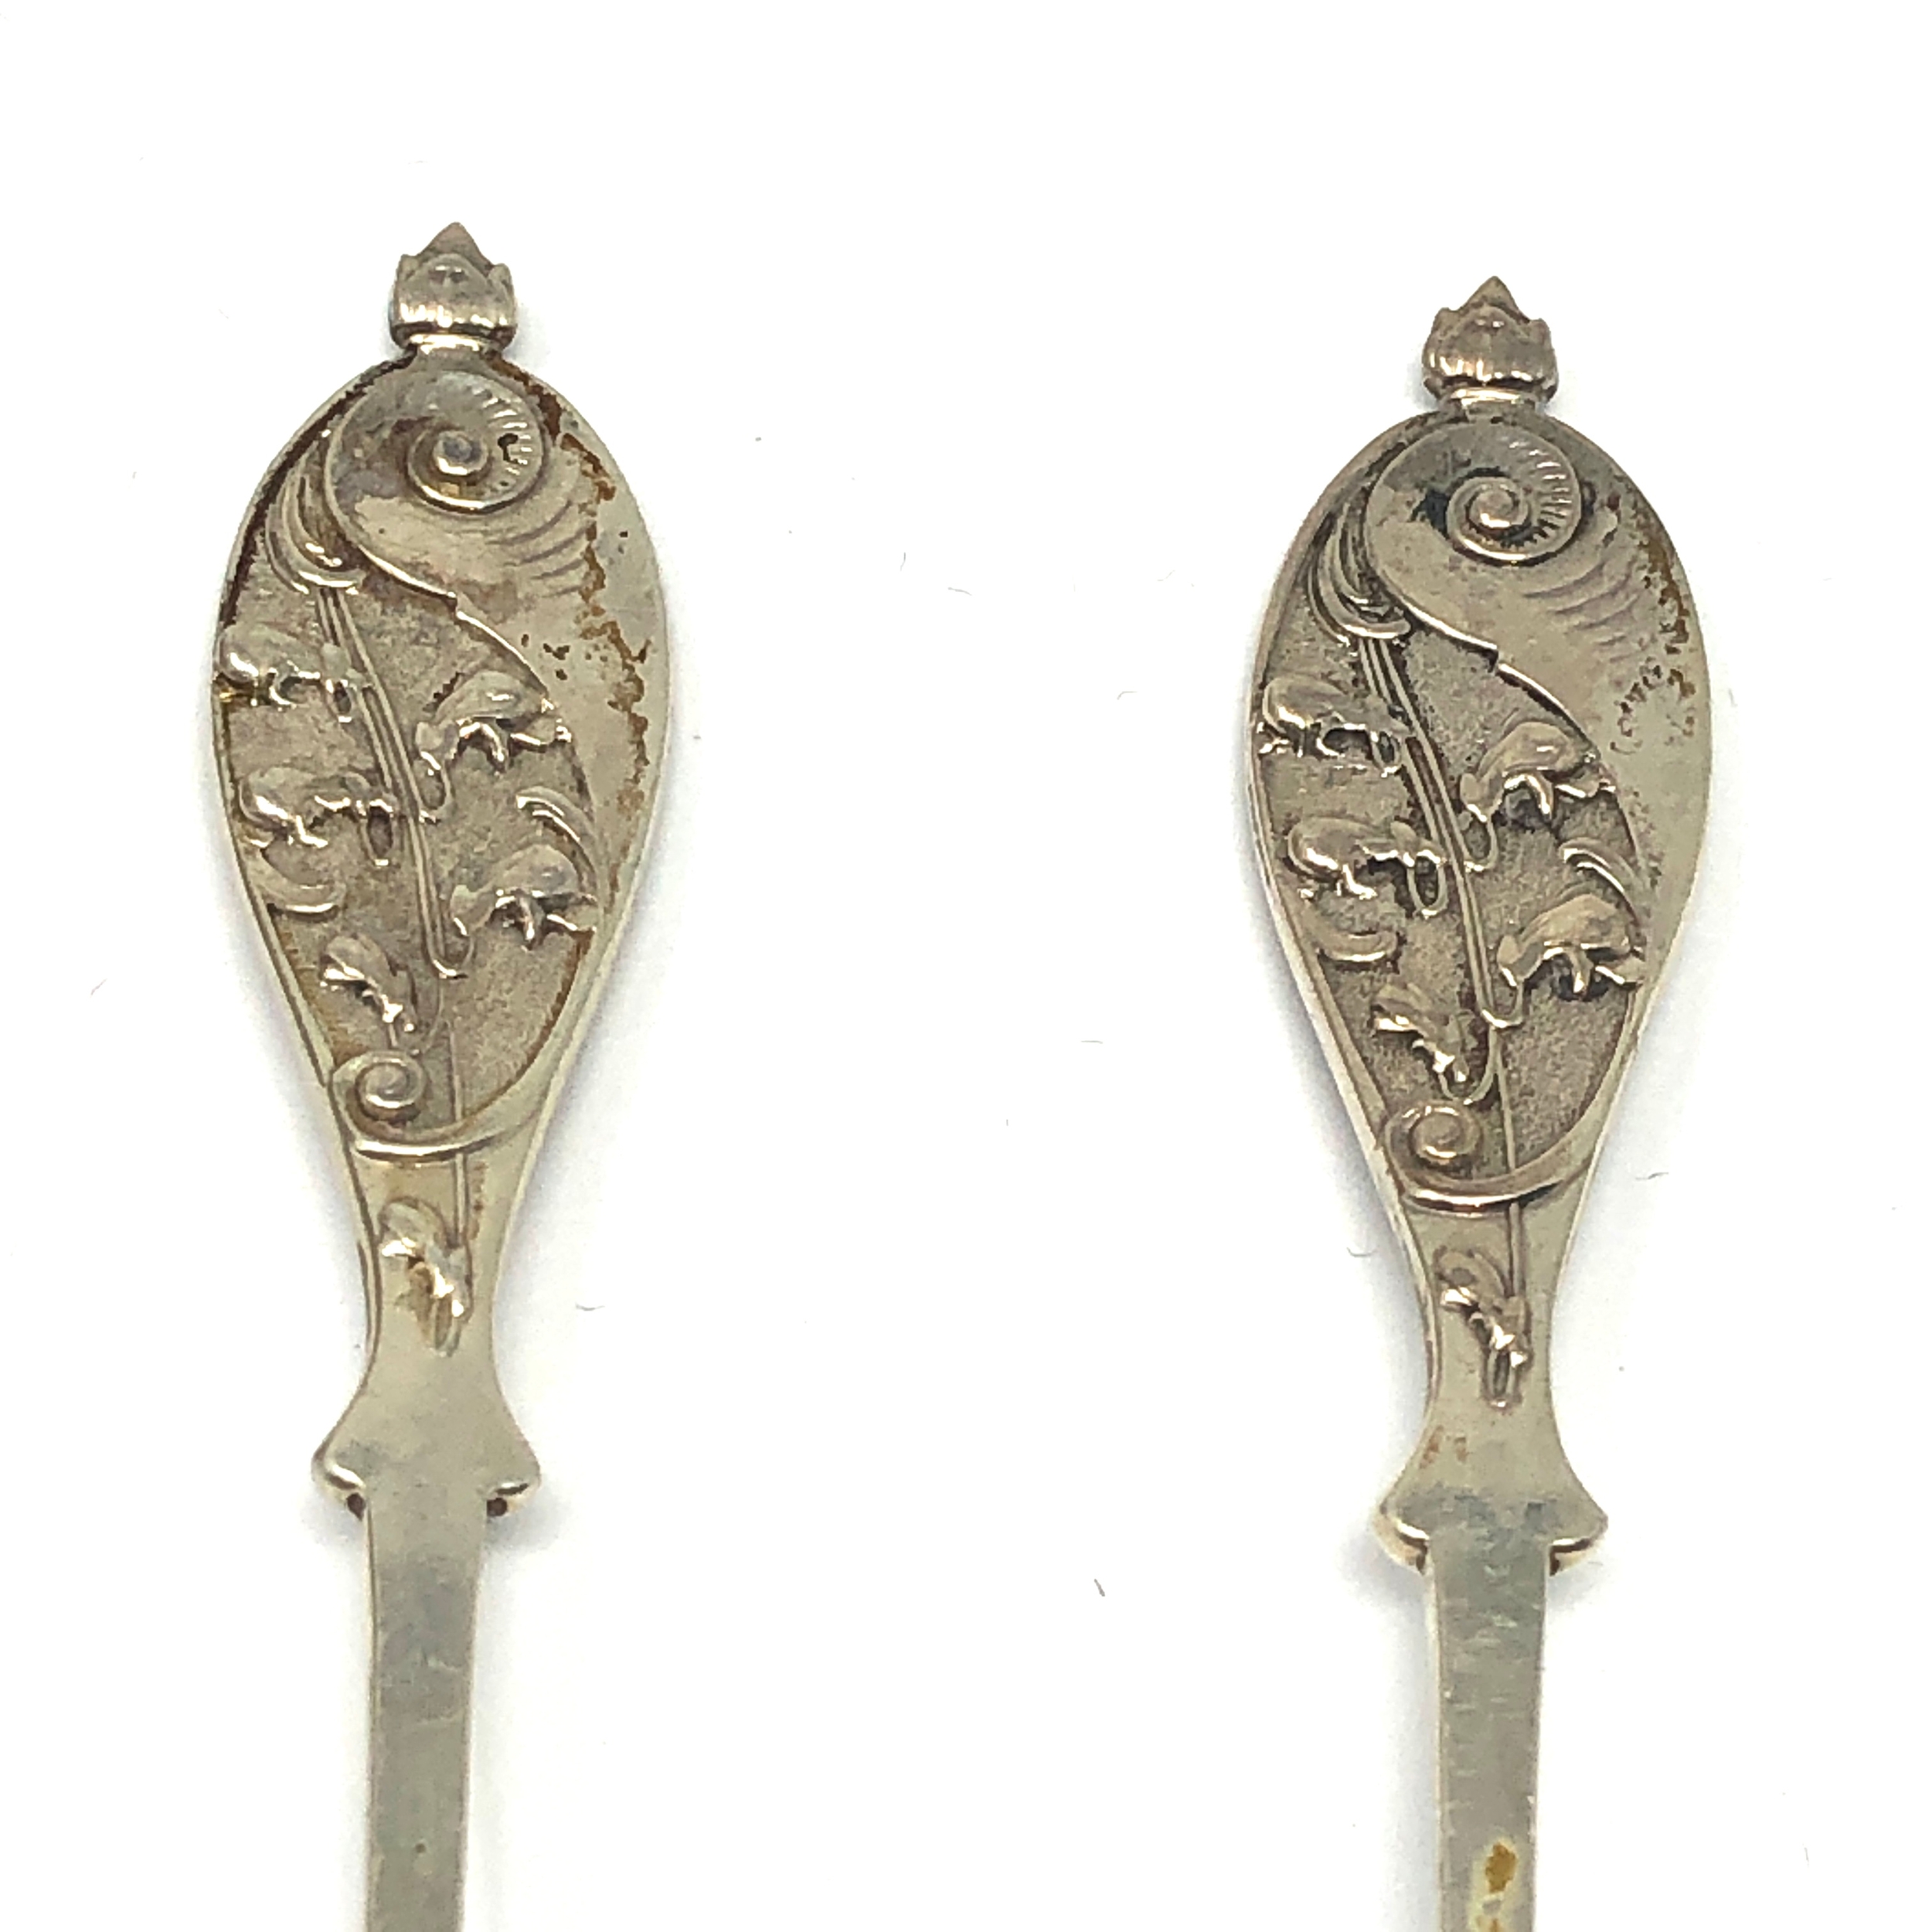 6 antique continental silver tea spoons & strainer - Image 3 of 4